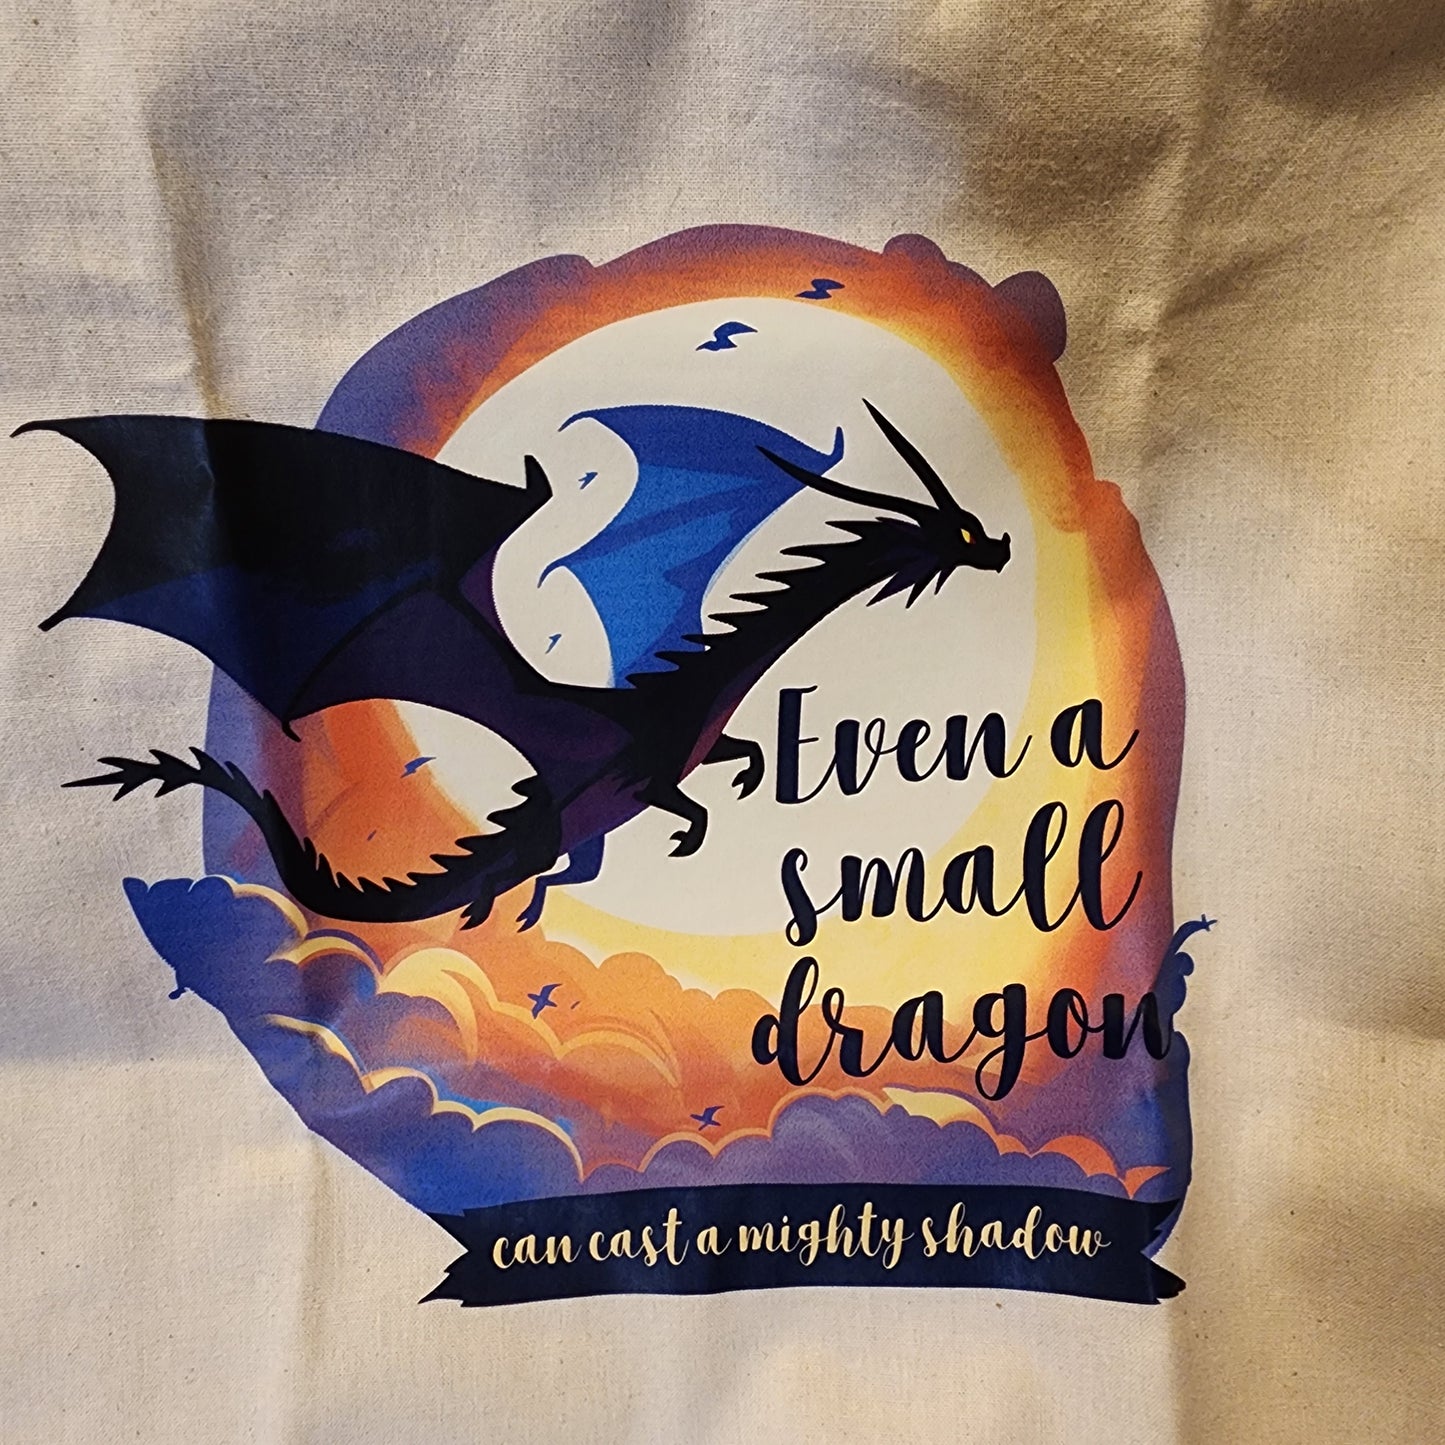 Exclusive Dragon Wisdom Tote Bag: Even a small dragon can cast a mighty shadow.